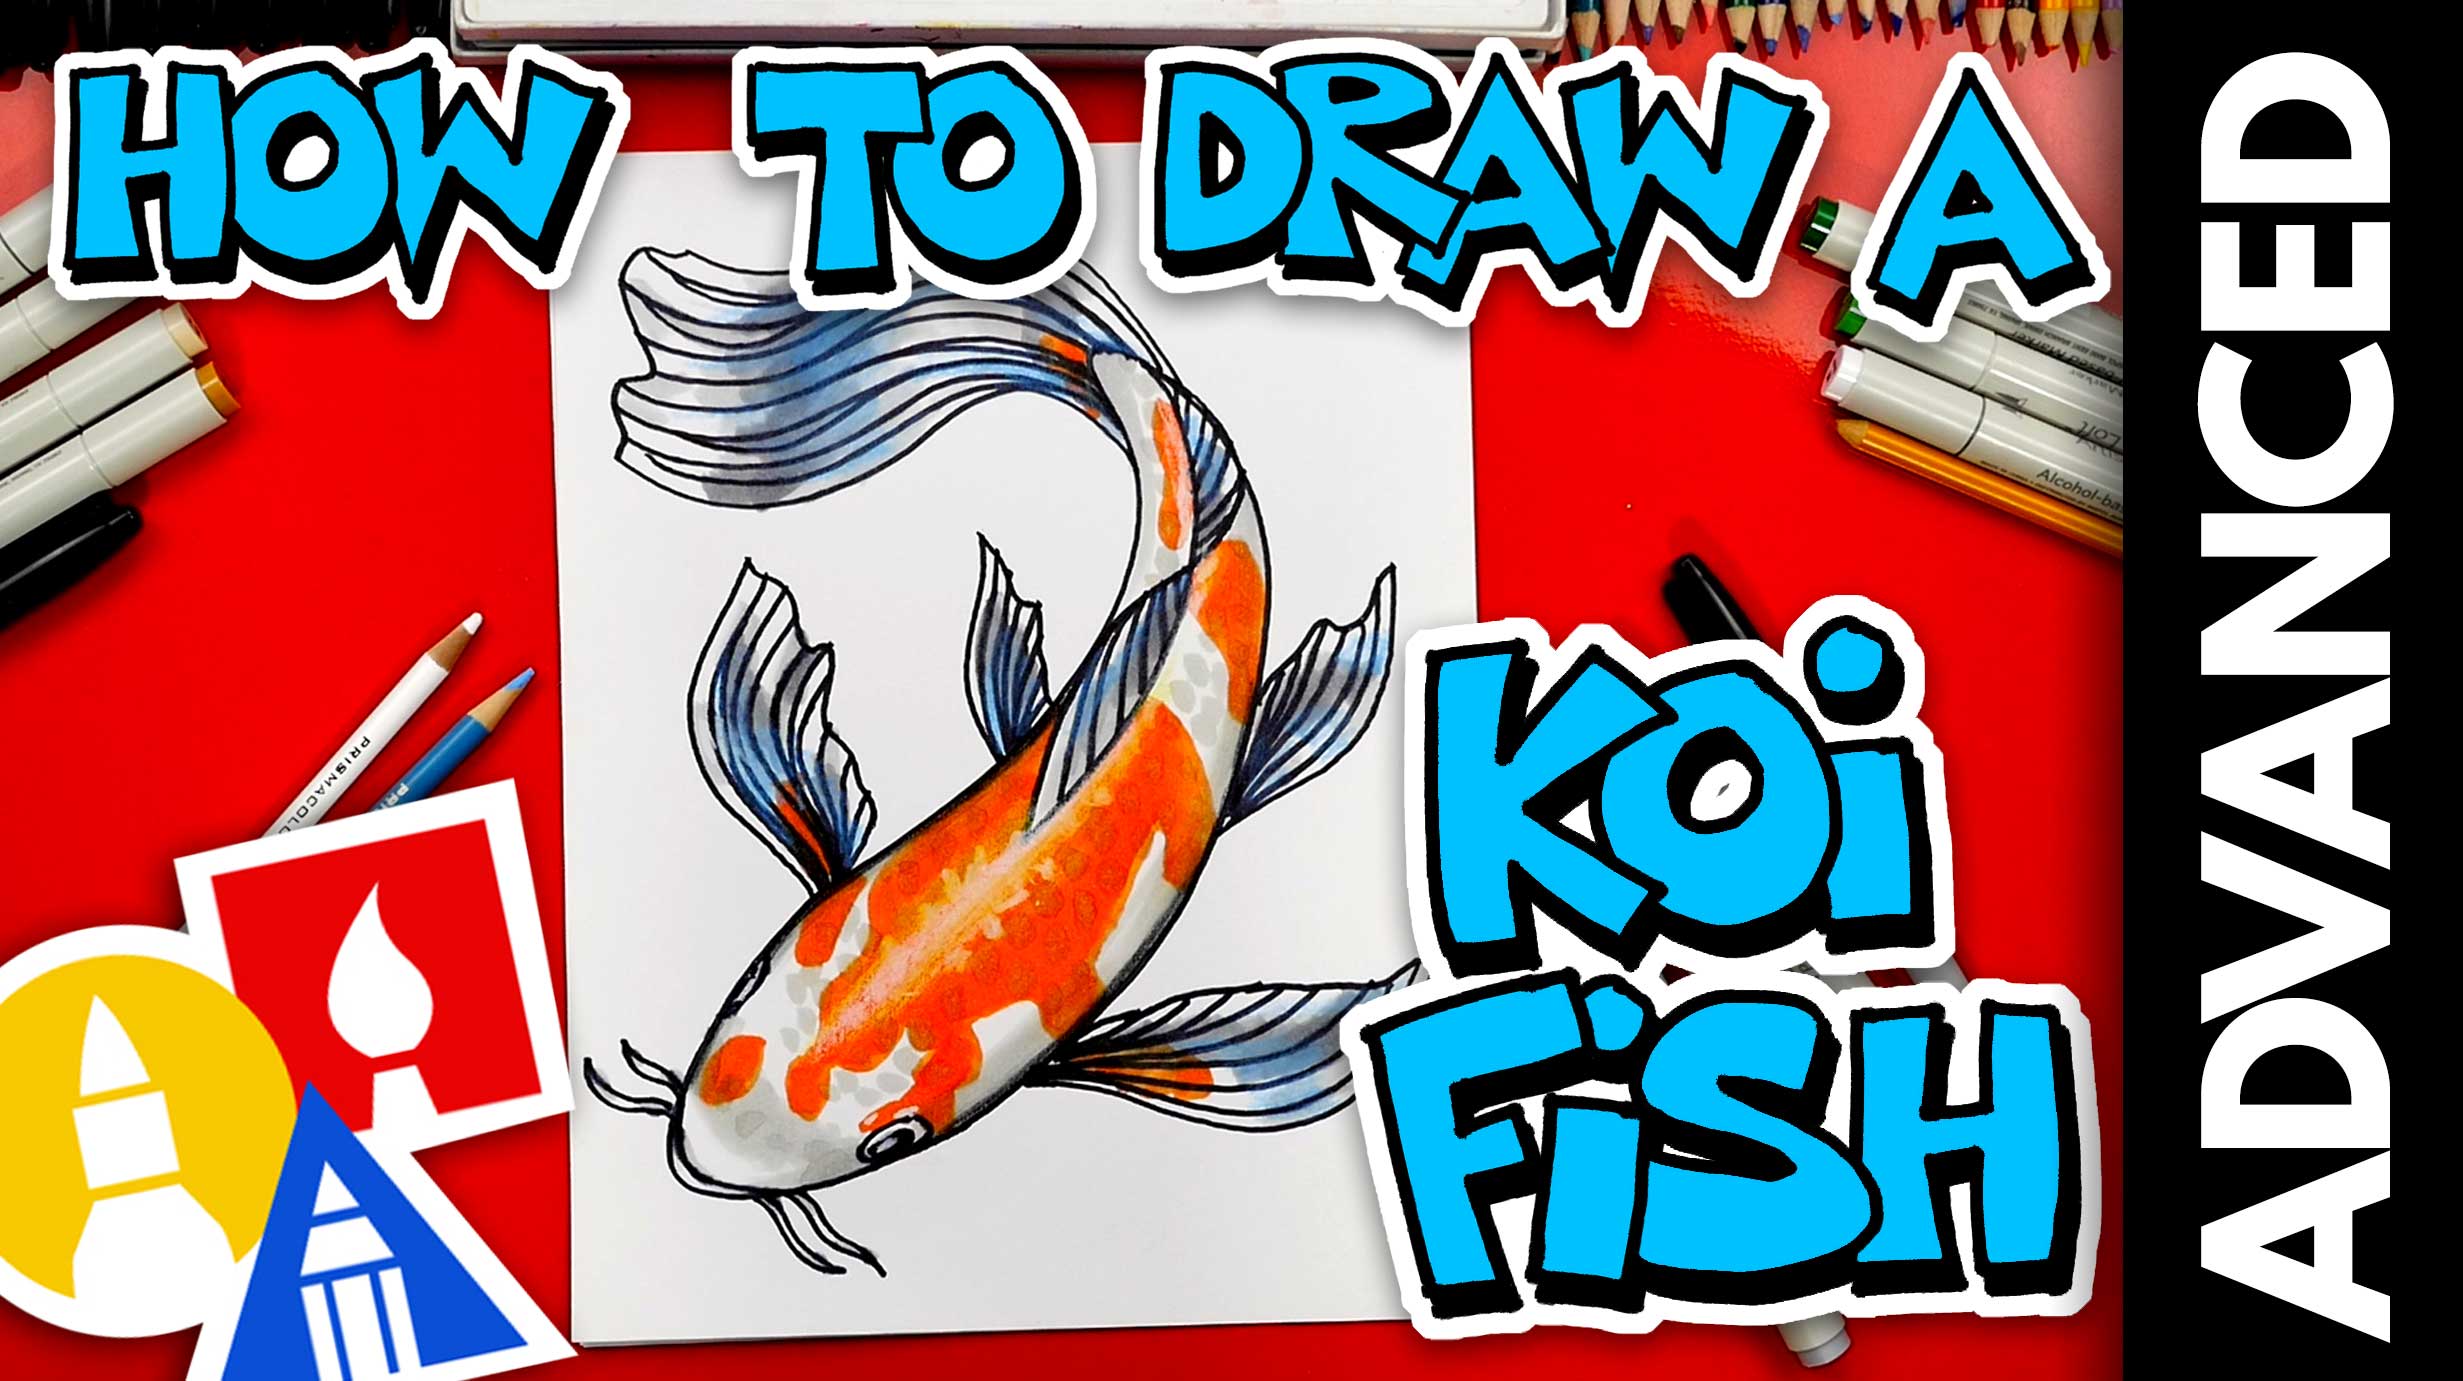 How To Draw A Koi Fish - Advanced 13 and UP - Art For Kids Hub 